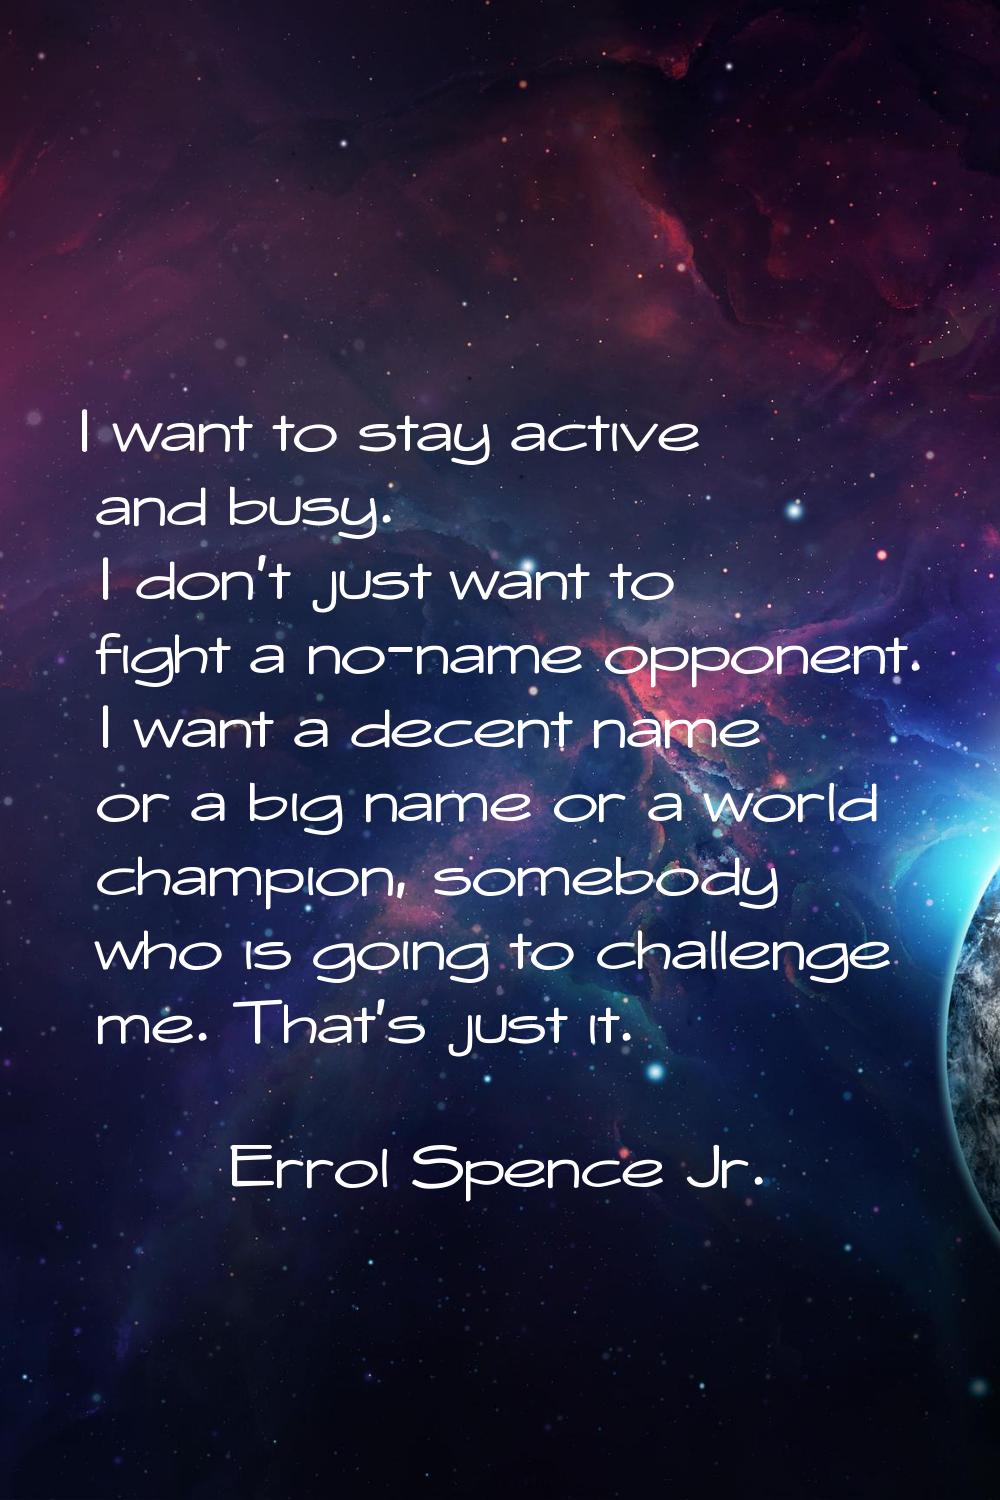 I want to stay active and busy. I don't just want to fight a no-name opponent. I want a decent name